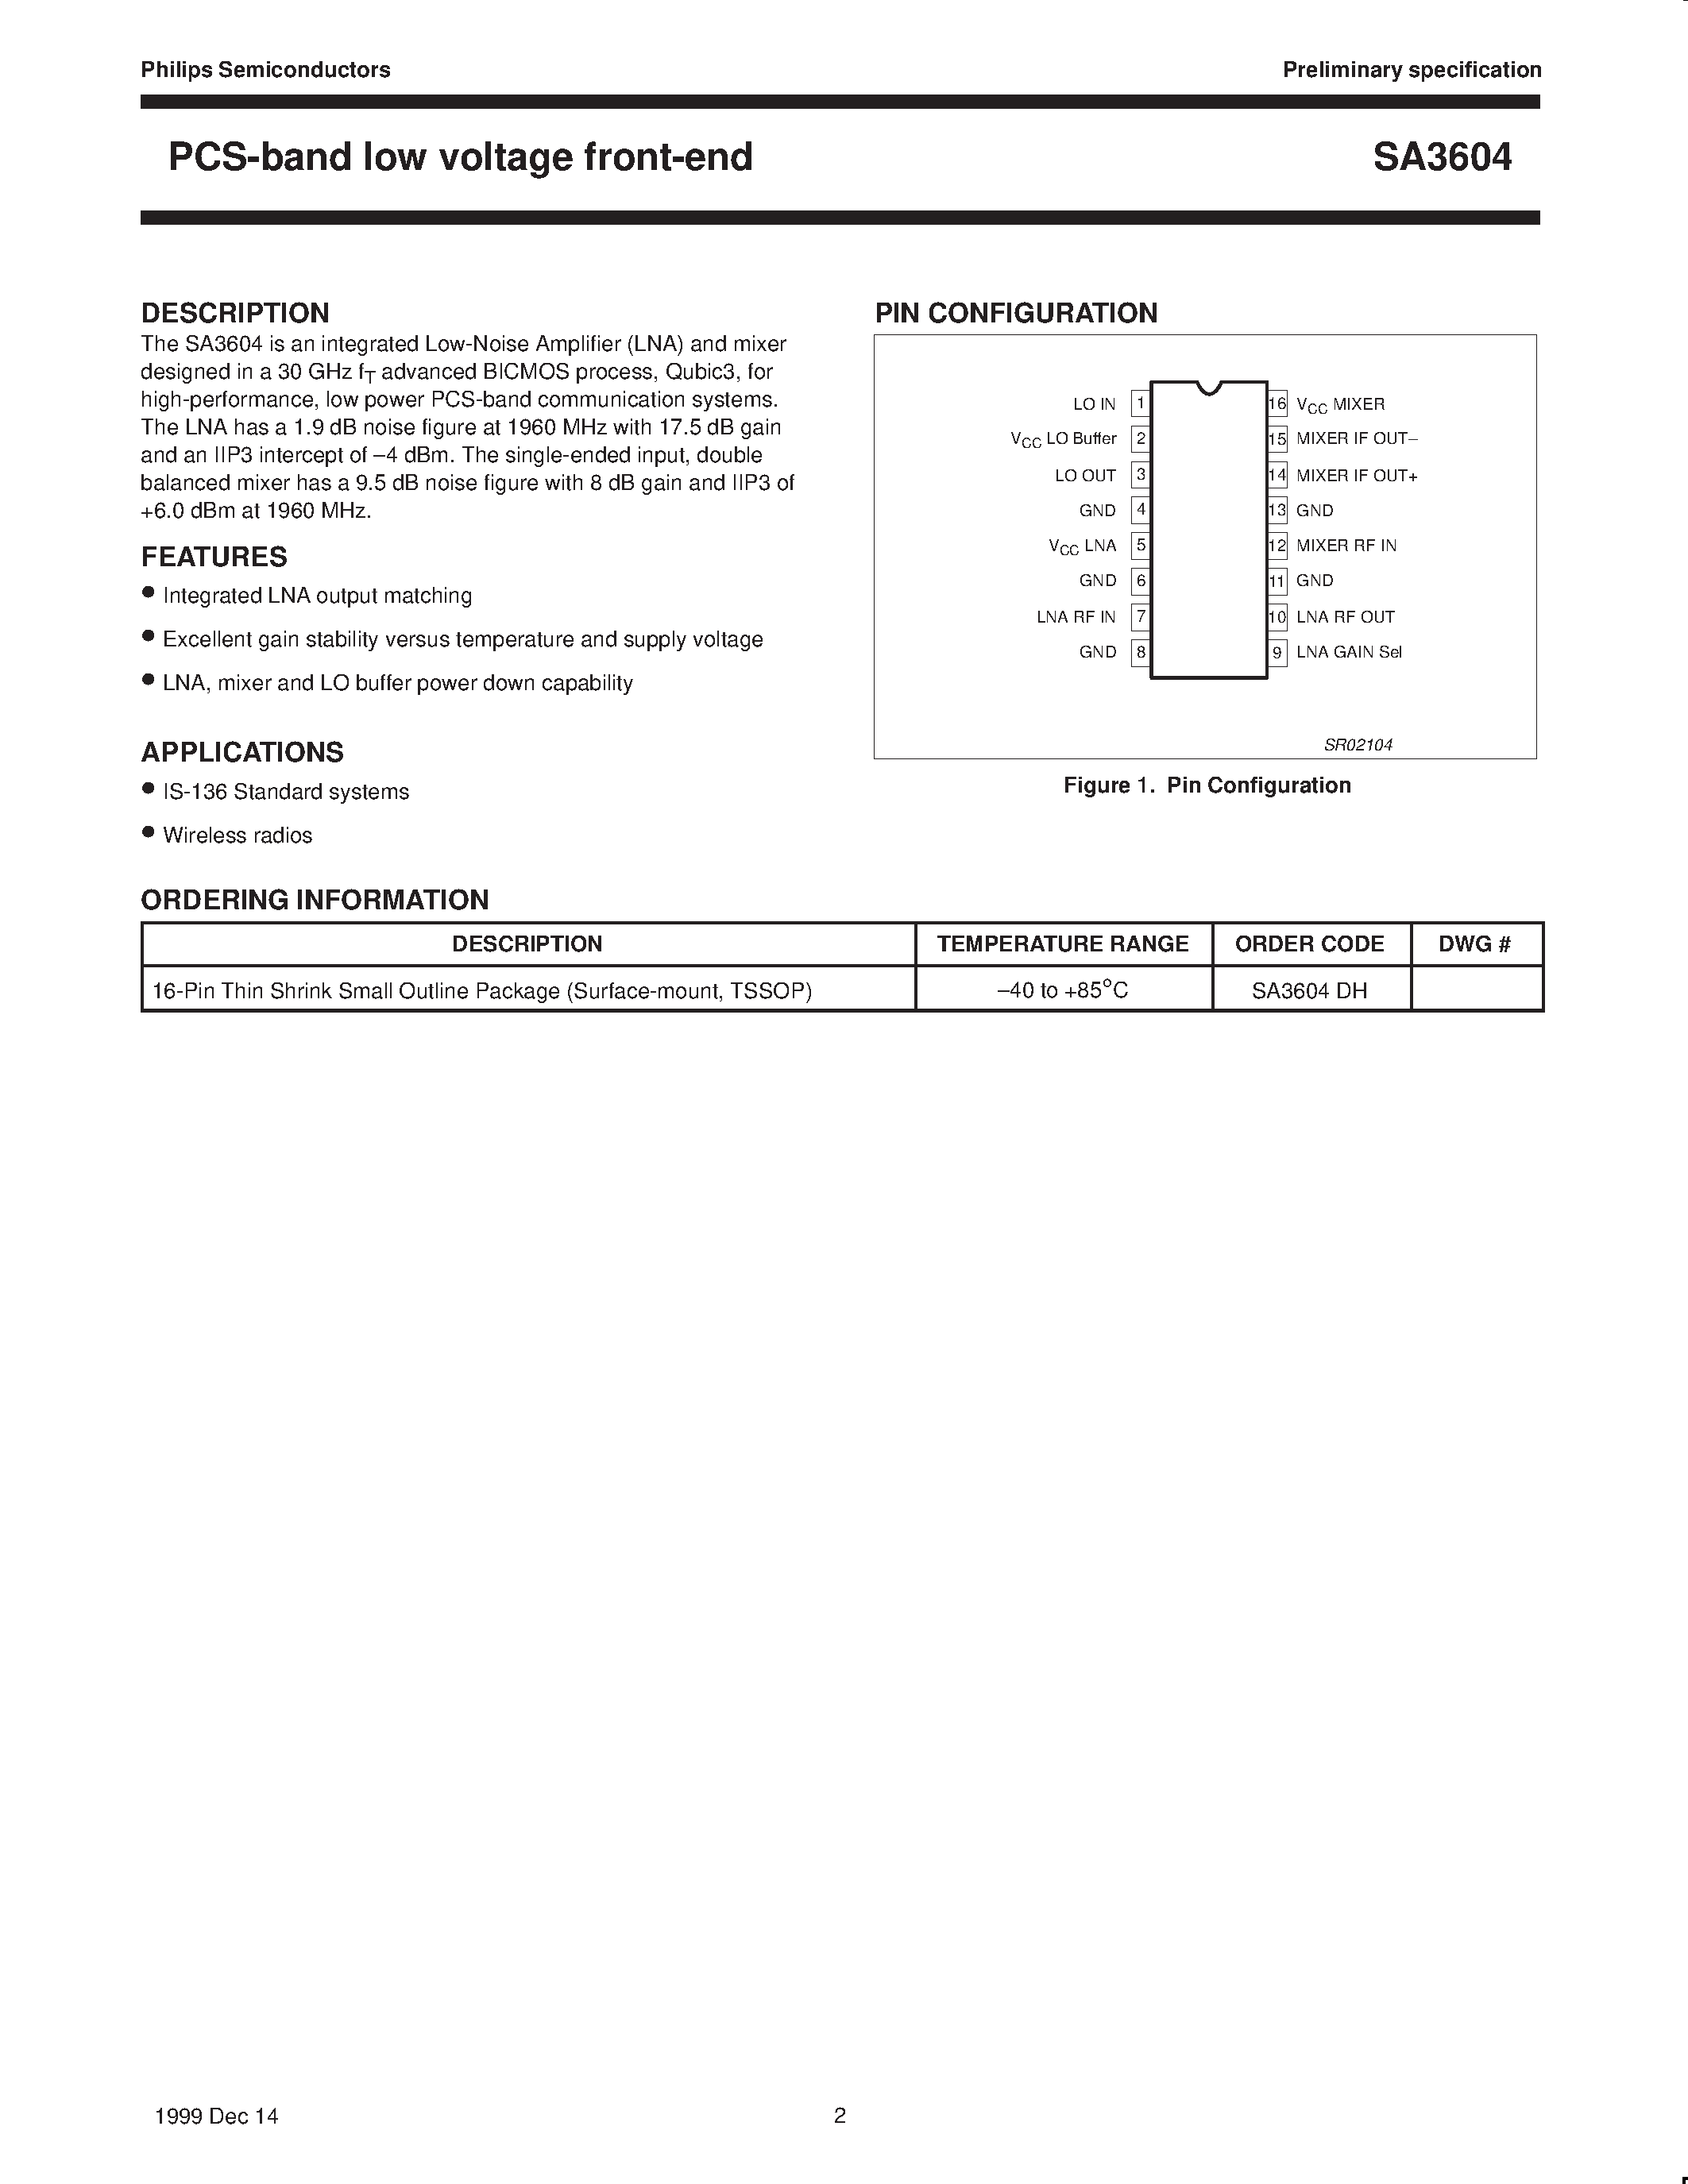 Datasheet SA3604 - PCS-band low voltage front-end page 2